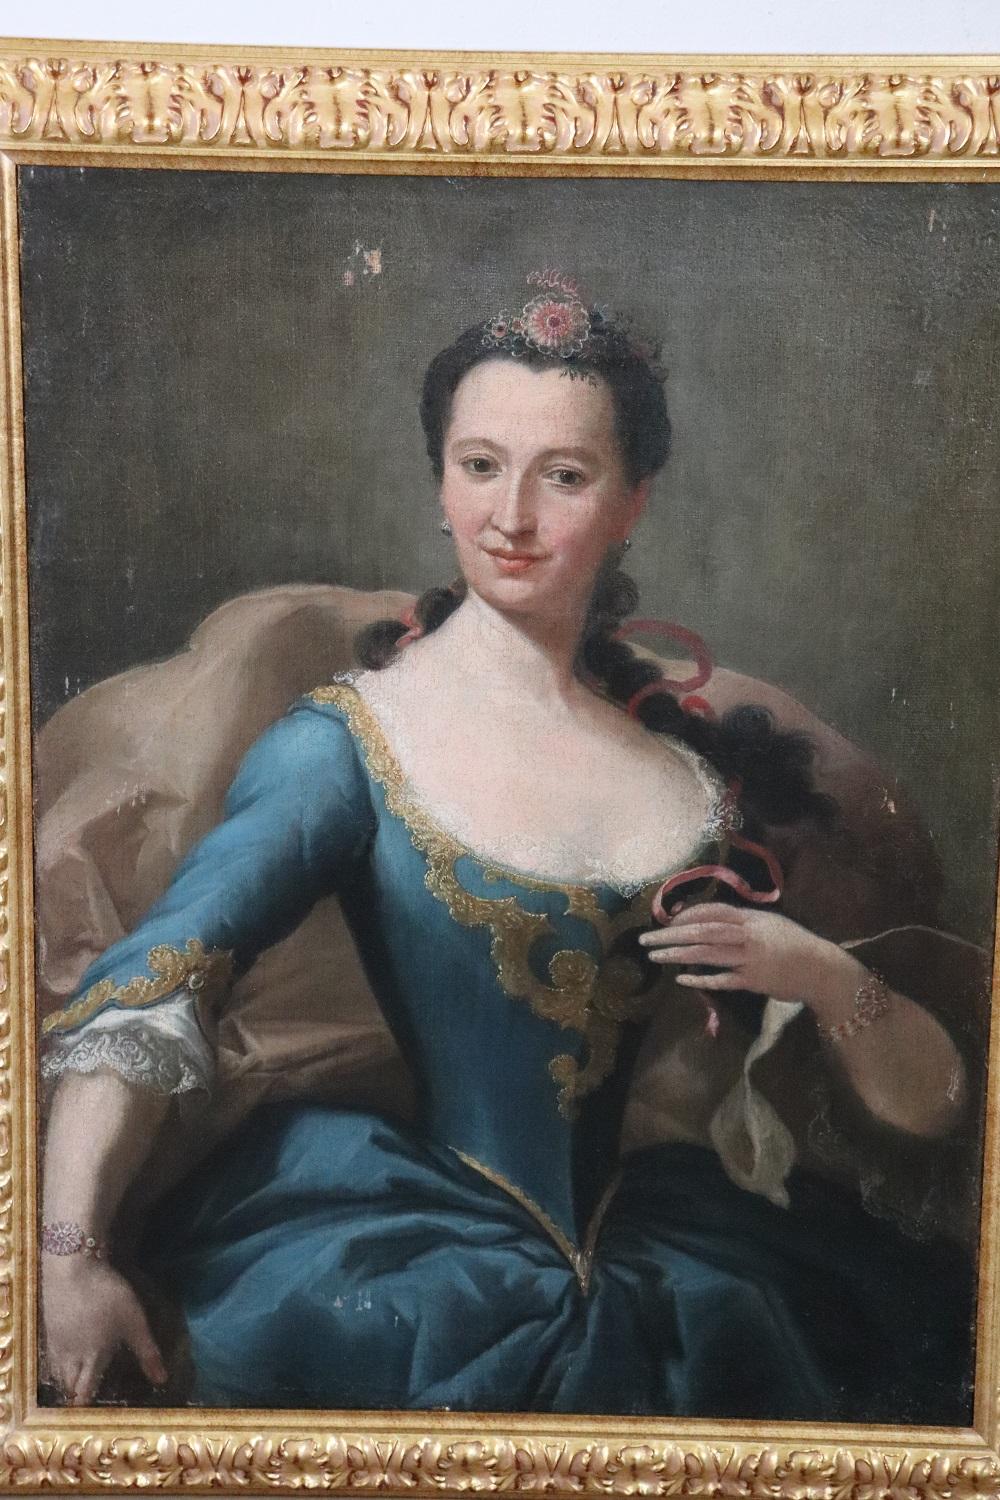 Beautiful antique oil painting on canvas 1750s. A splendid portrait of a Noble Lady. Excellent pictorial quality great attention to detail. Gorgeous Lady with a sweet and happy expression of her noble life. The hairstyle, the fair skin and the